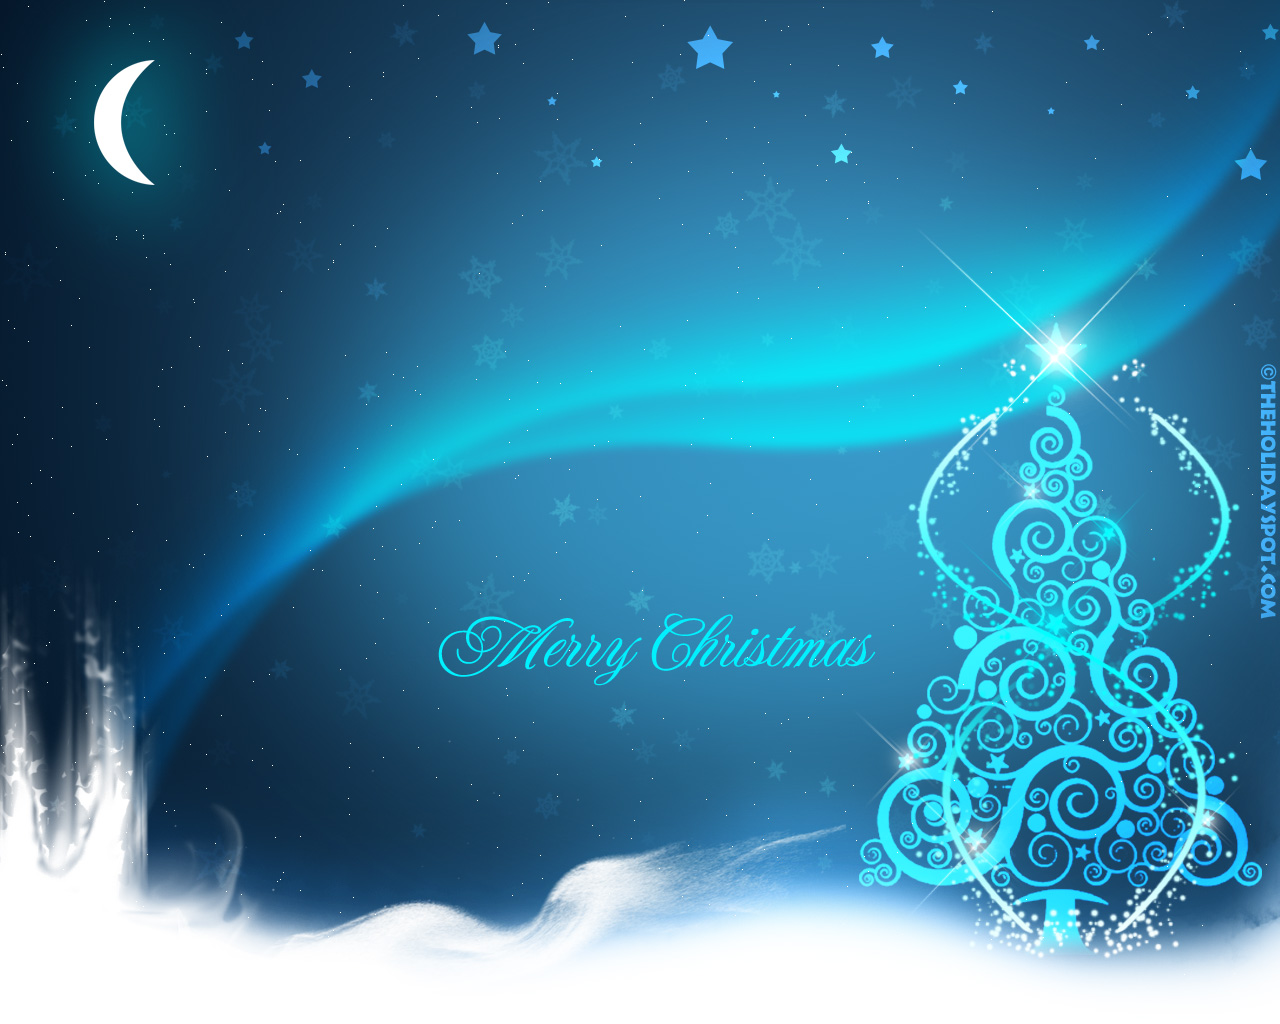 PicturesPool: Happy Christmas 2013  Merry Xmas Wallpapers